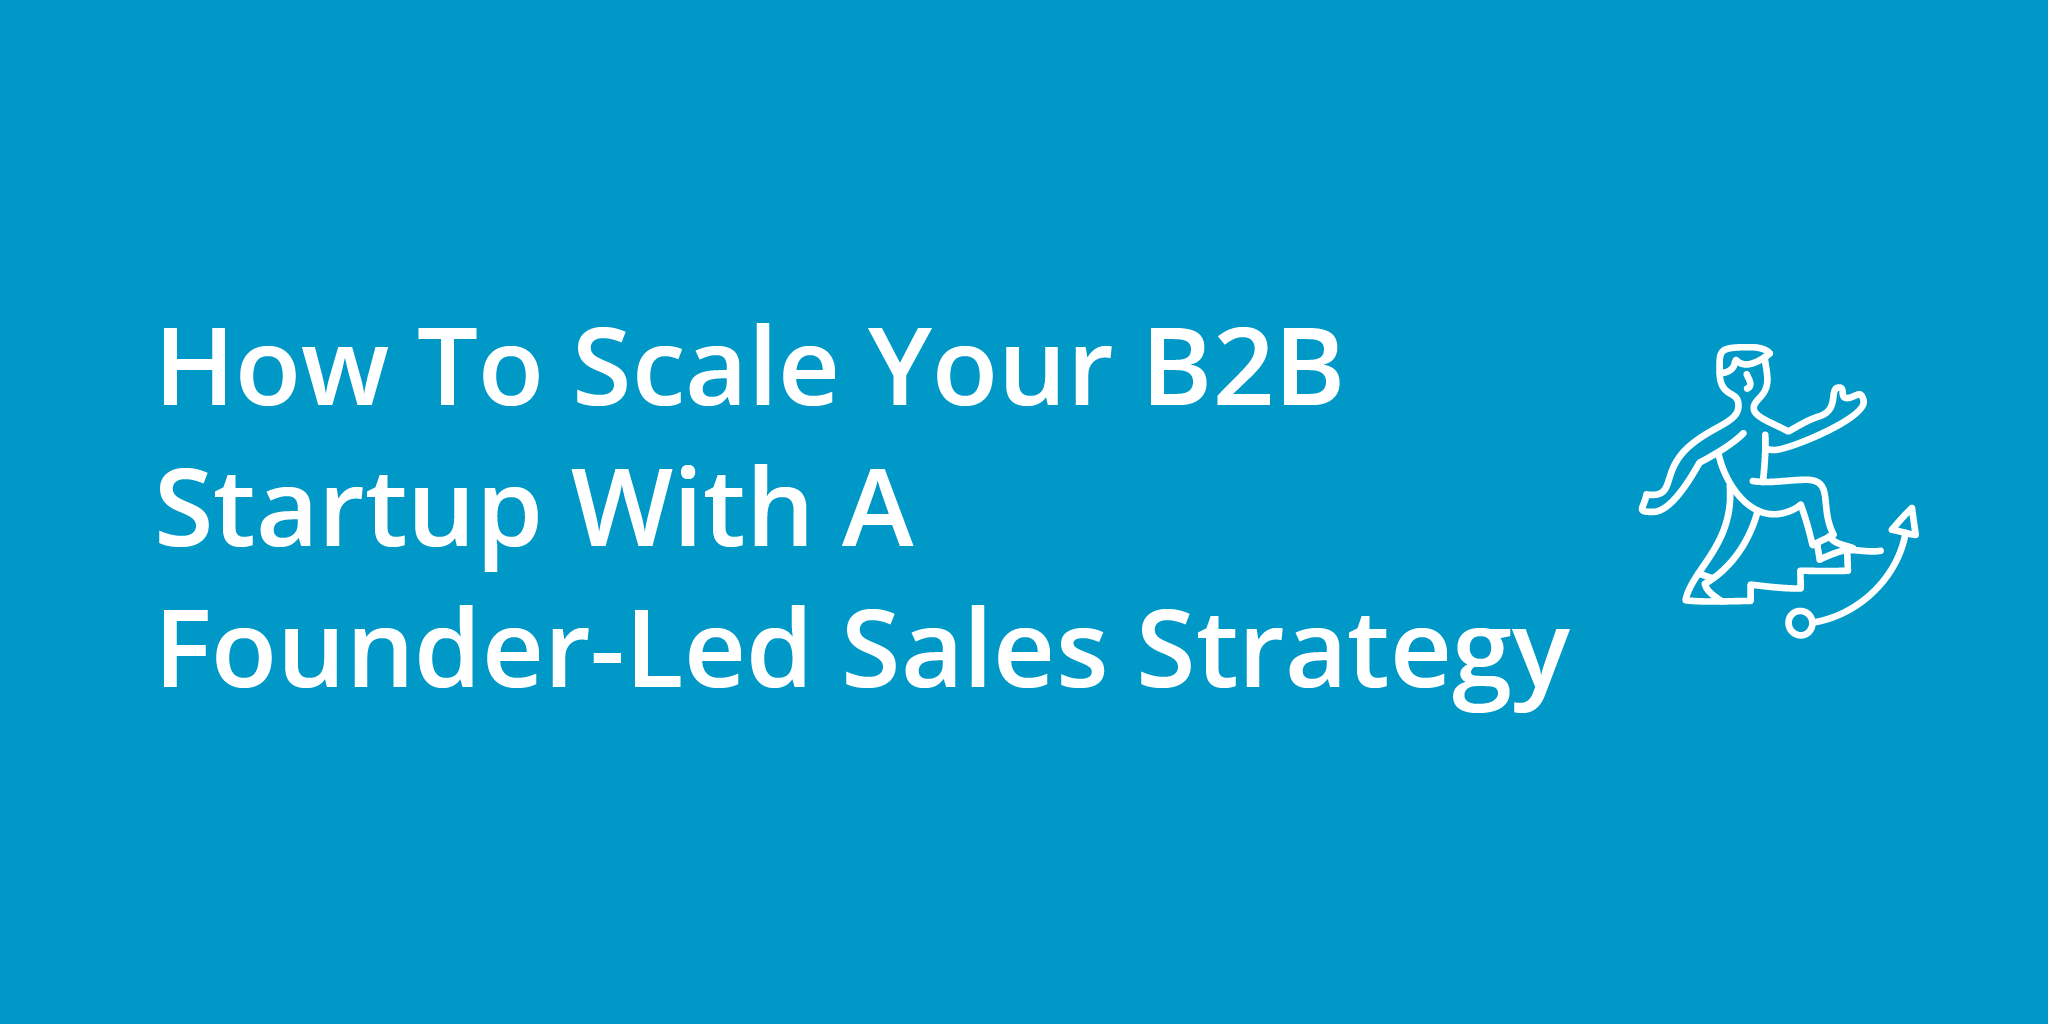 How To Scale Your B2B Startup With A Founder-Led Sales Strategy | Telephones for business